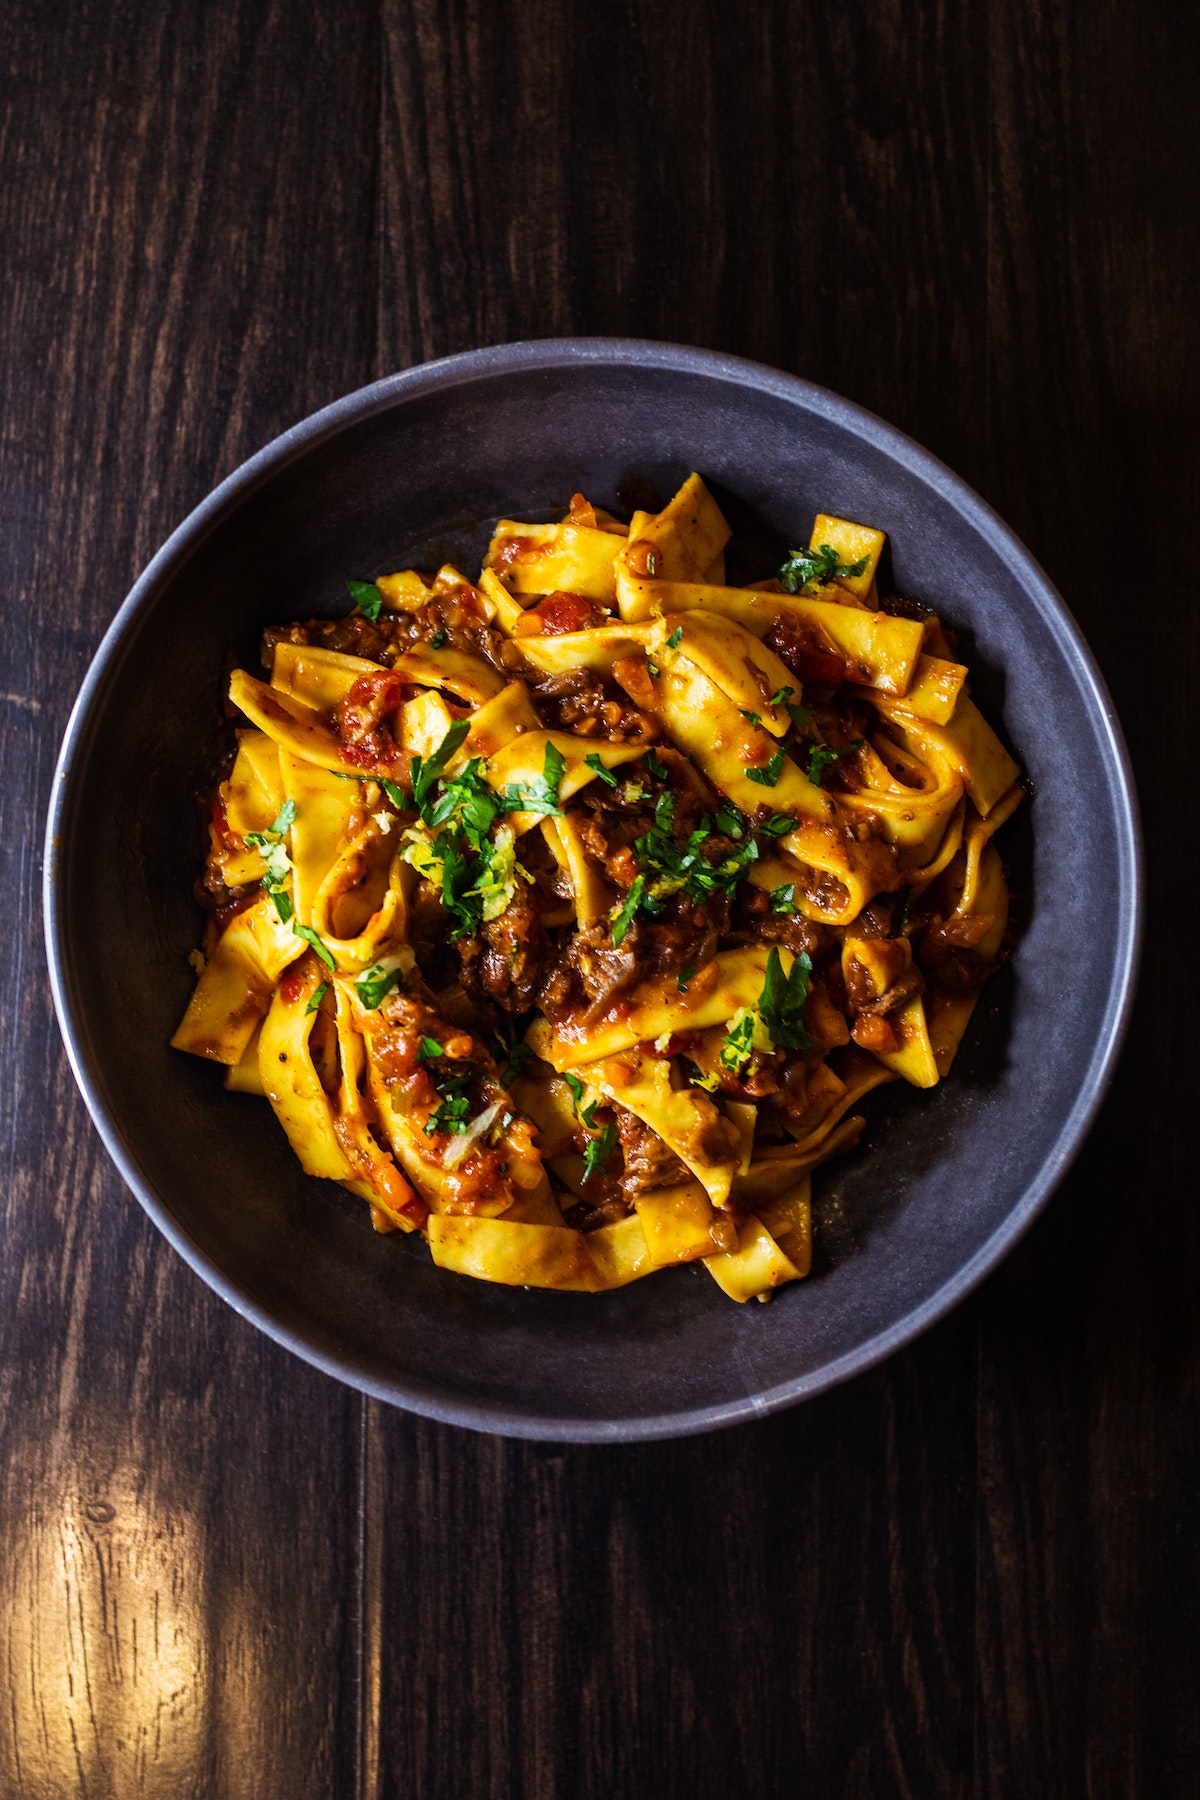 Overhead shot of long, wide pasta with meat sauce and herbs in a bowl against a dark background